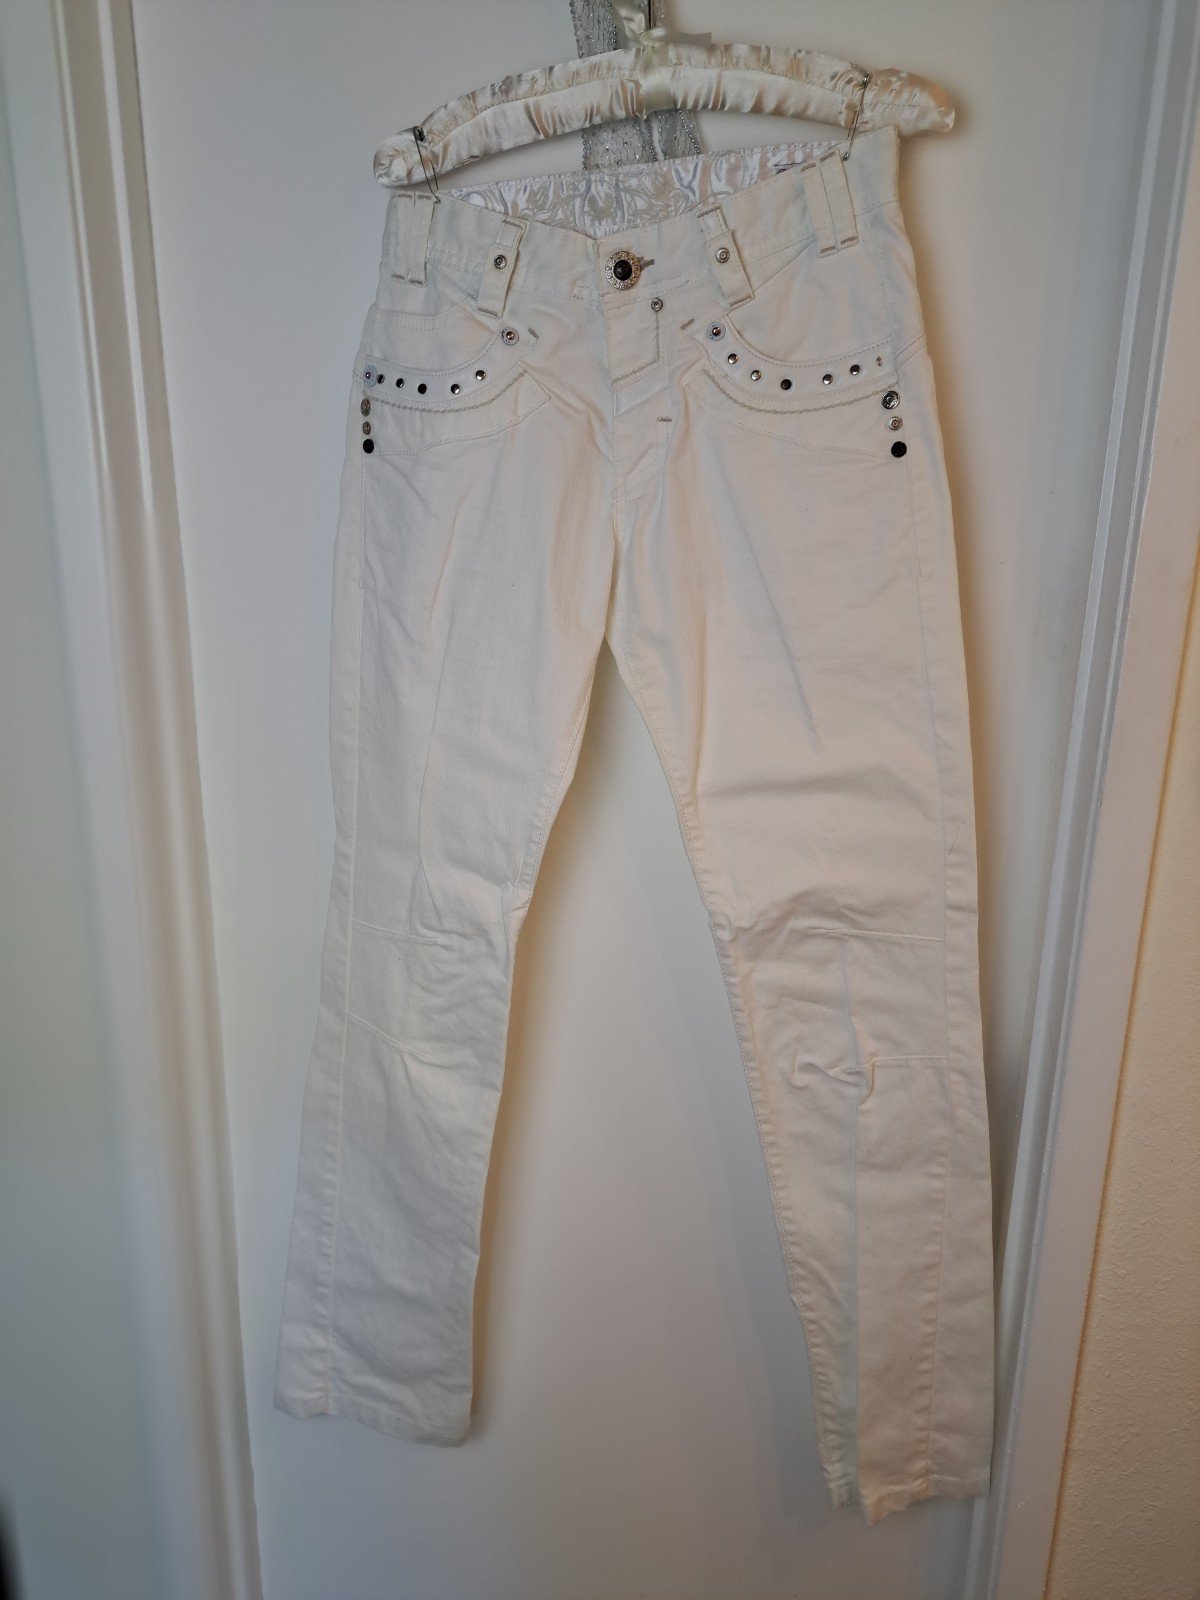 Cheap RNT 23 biker new white studded button front jeans